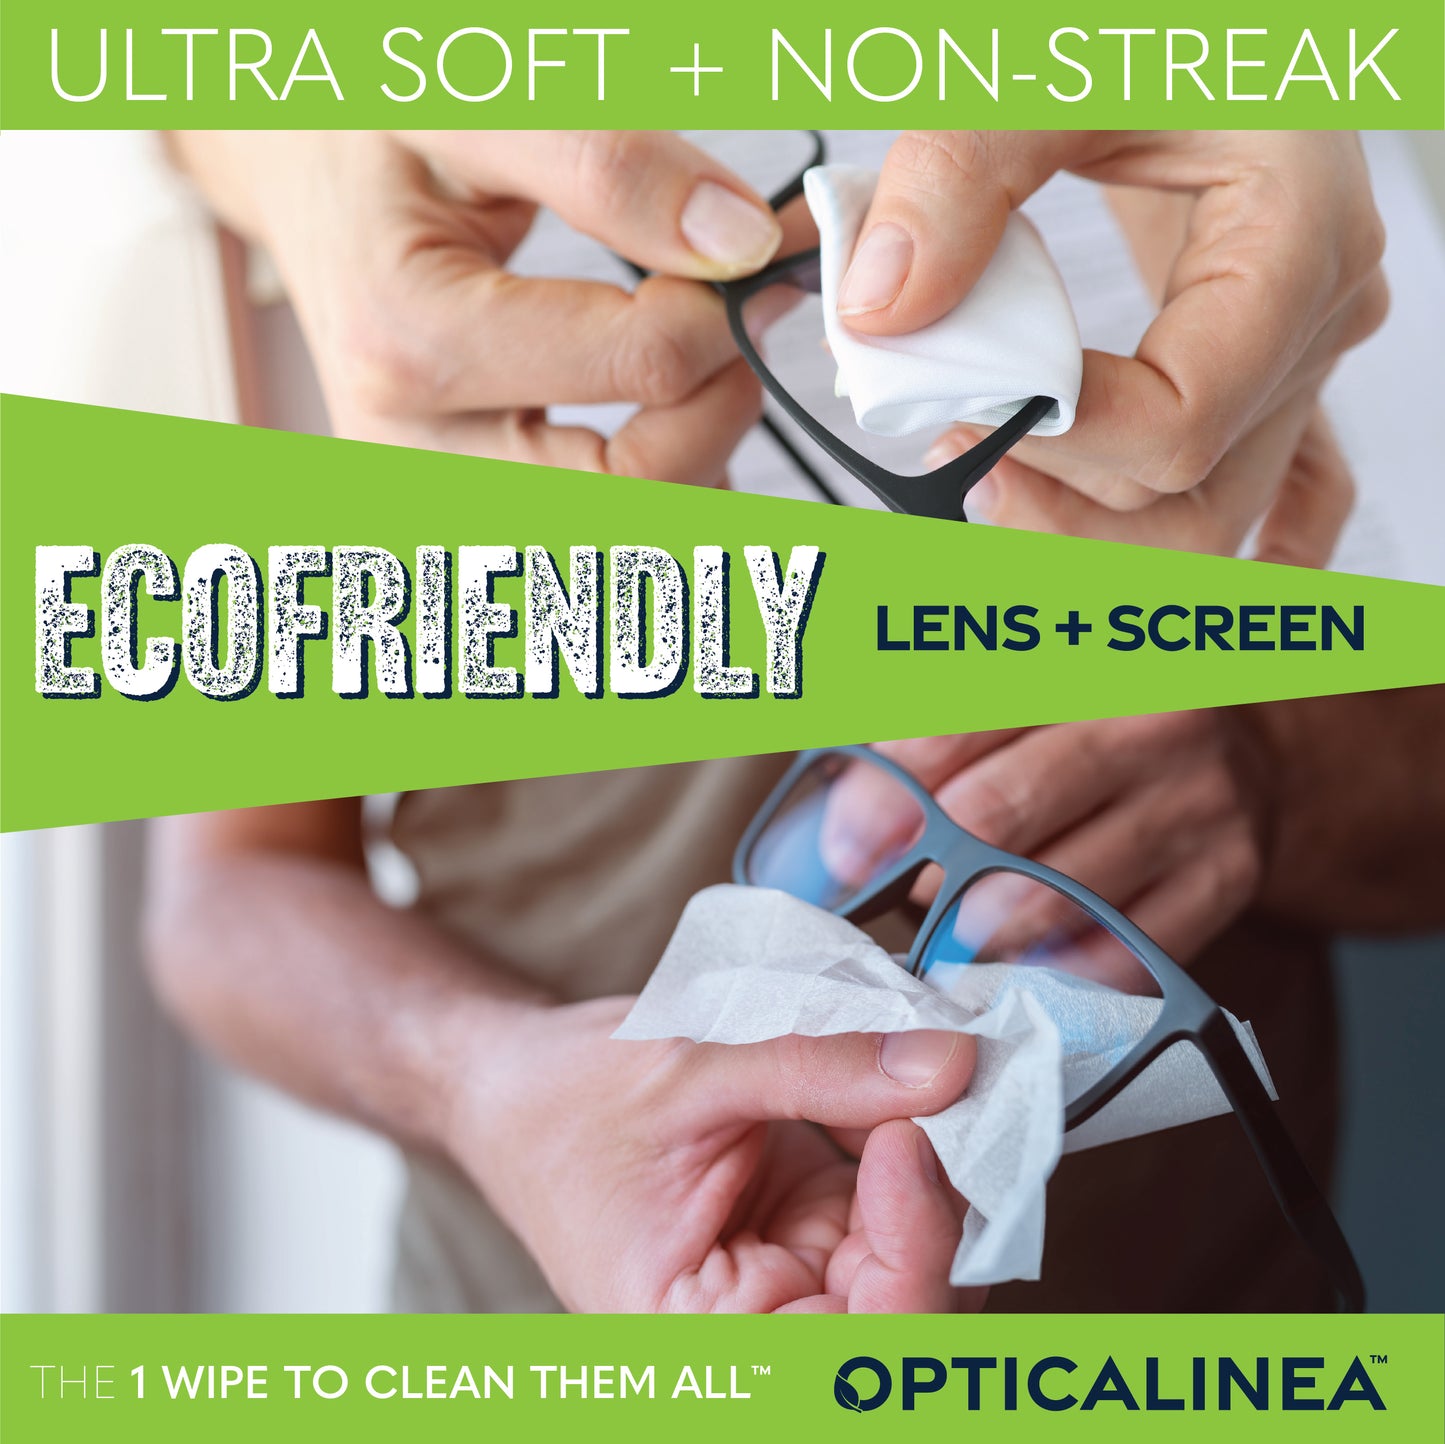 ECOFRIENDLY LENS + SCREEN CLEANING WIPES - 100CT